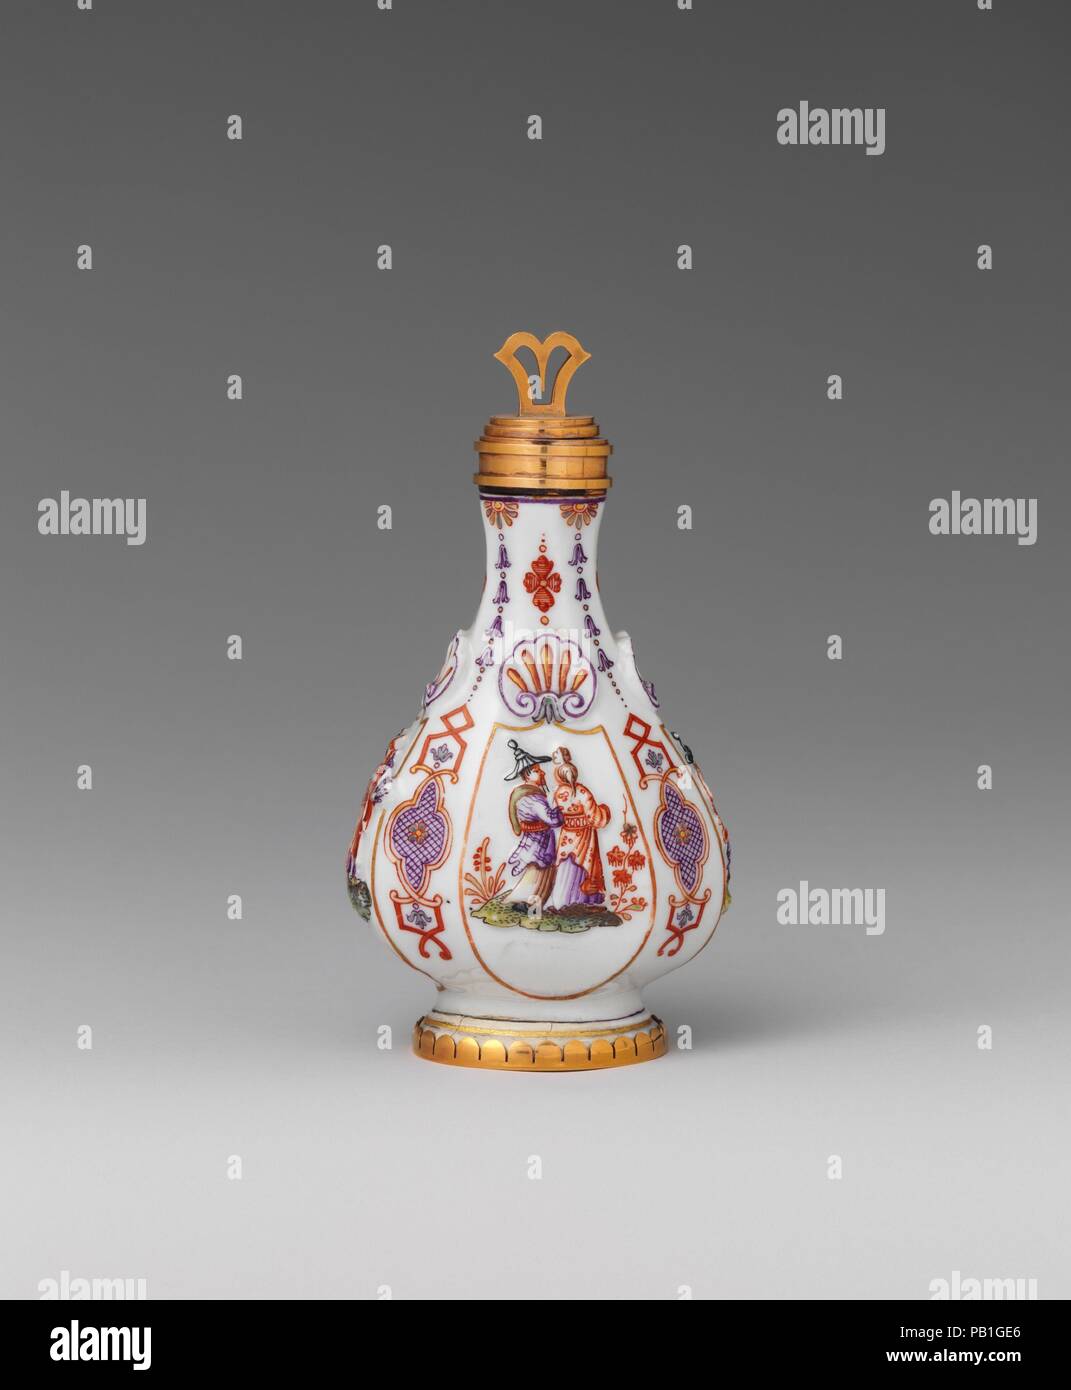 Scent bottle. Culture: Austrian, Vienna. Dimensions: Height: 3 3/8 in. (8.6 cm). Factory: Vienna. Factory director: Du Paquier period (1718-1744). Date: ca. 1730.  Medieval travelers used leather pilgrim flasks to transport water. The form was appropriated in later centuries for large, opulent examples made in silver or glass. Employed on small scale, it was an appropriate choice for a luxury object intended to hold an expensive fragrance. This example is embellished with low-relief decoration, including shells and chinoiserie figures, and ornamental strapwork. Museum: Metropolitan Museum of A Stock Photo